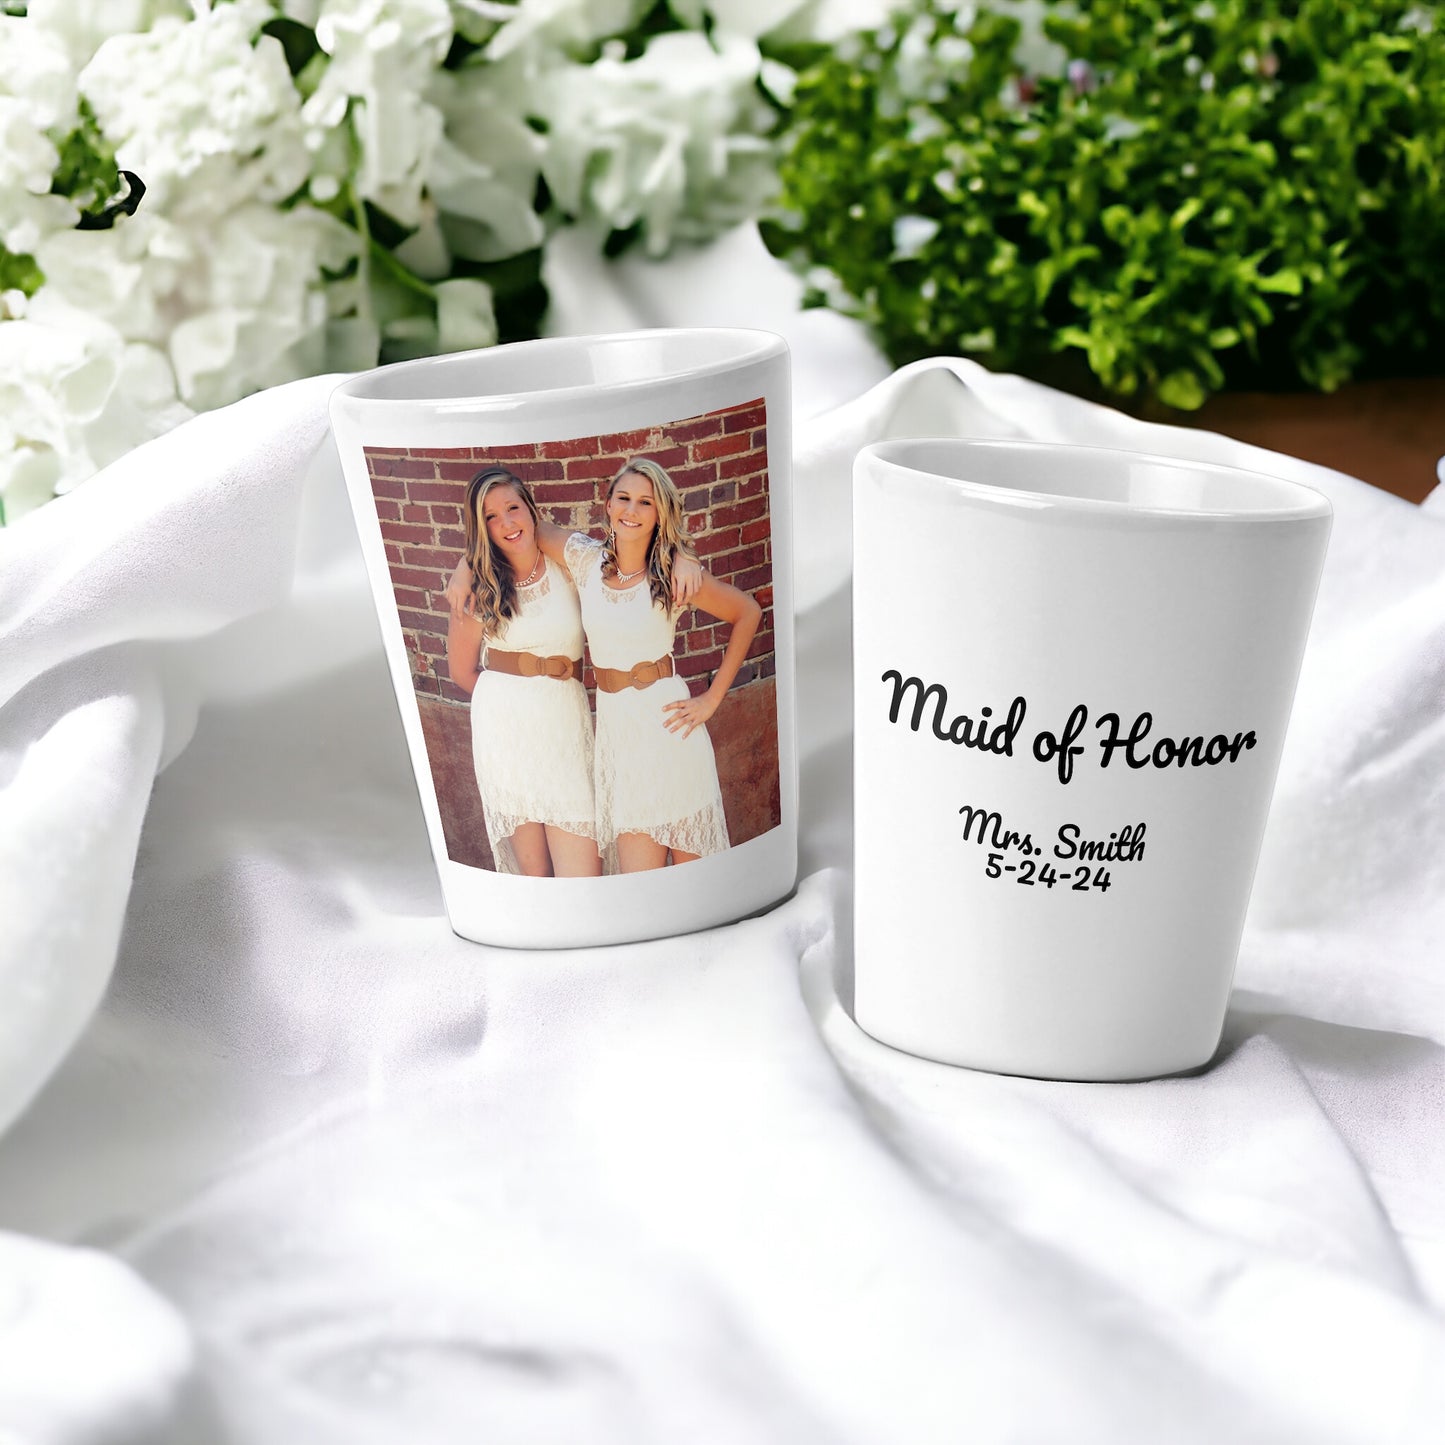 Personalized Shot Glass Bachelorette Party Favor - Bridesmaid Wedding Shot Glass with Picture